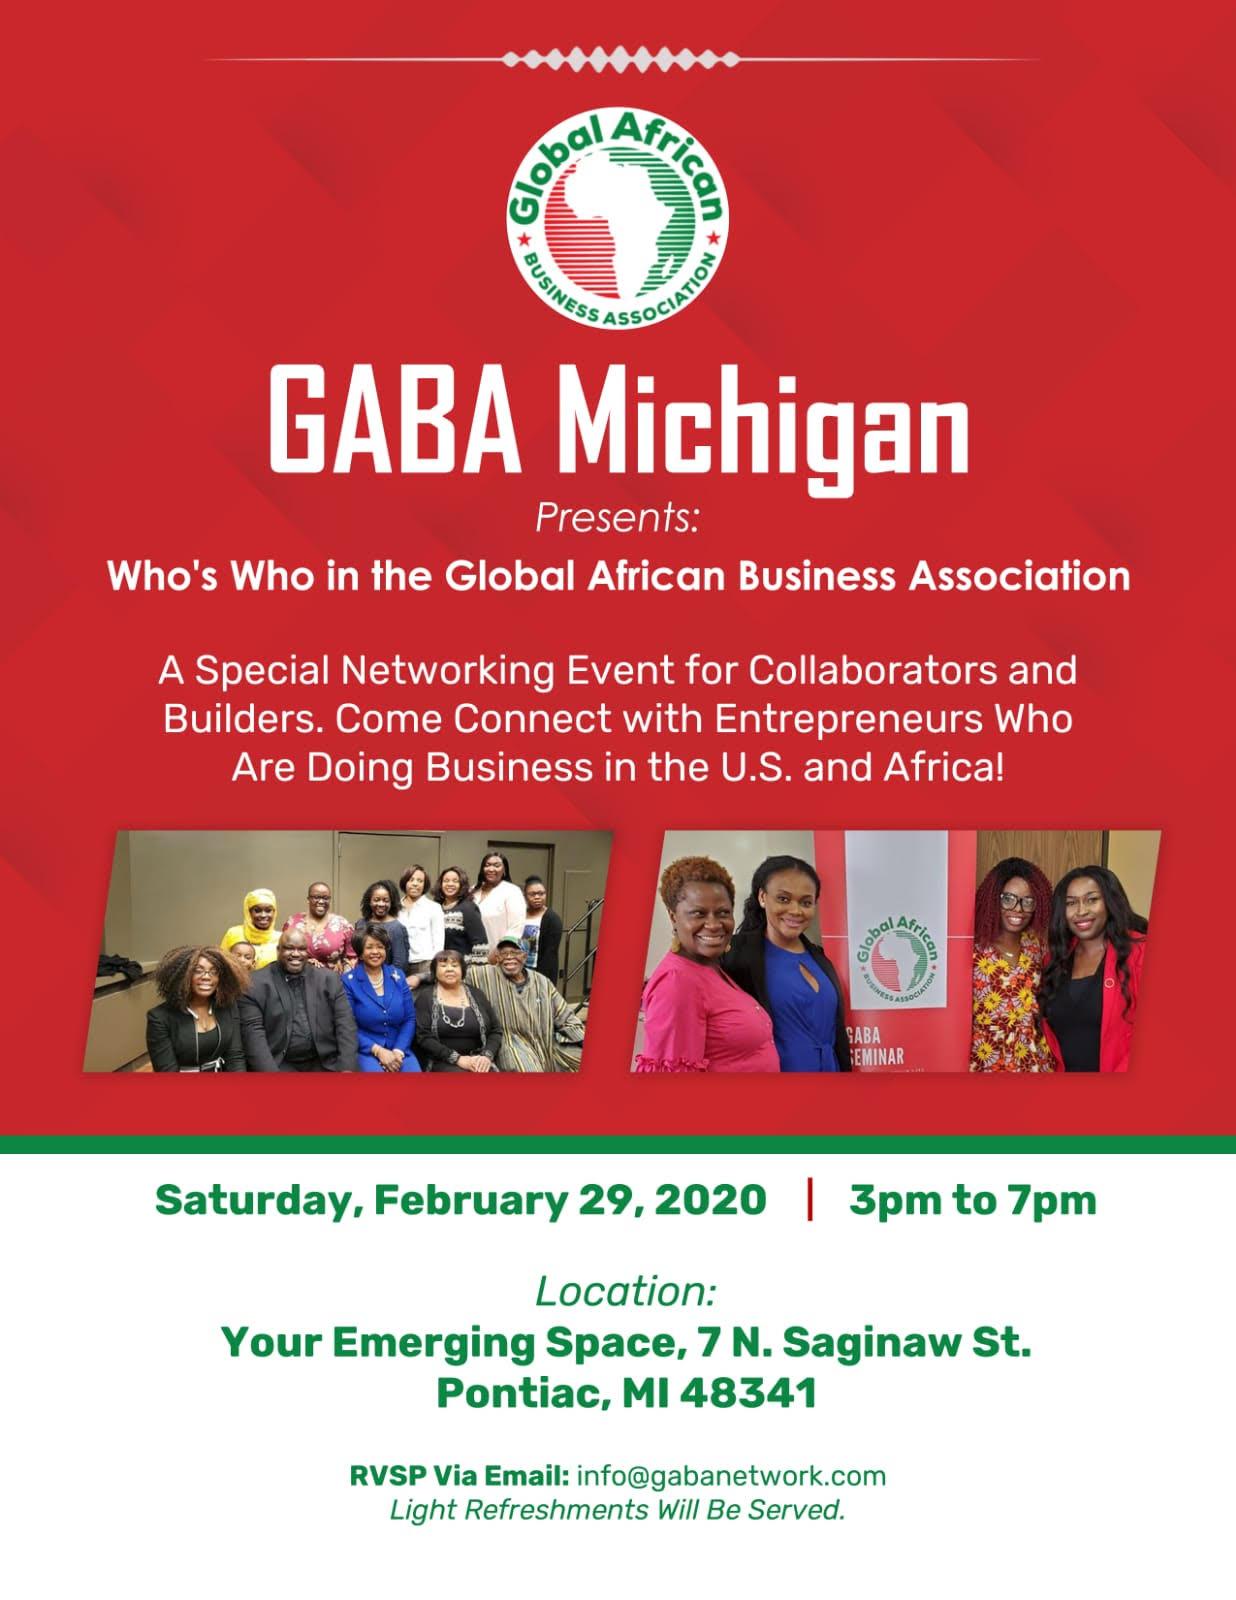 Who's Who in the Global African Business Association (GABA)